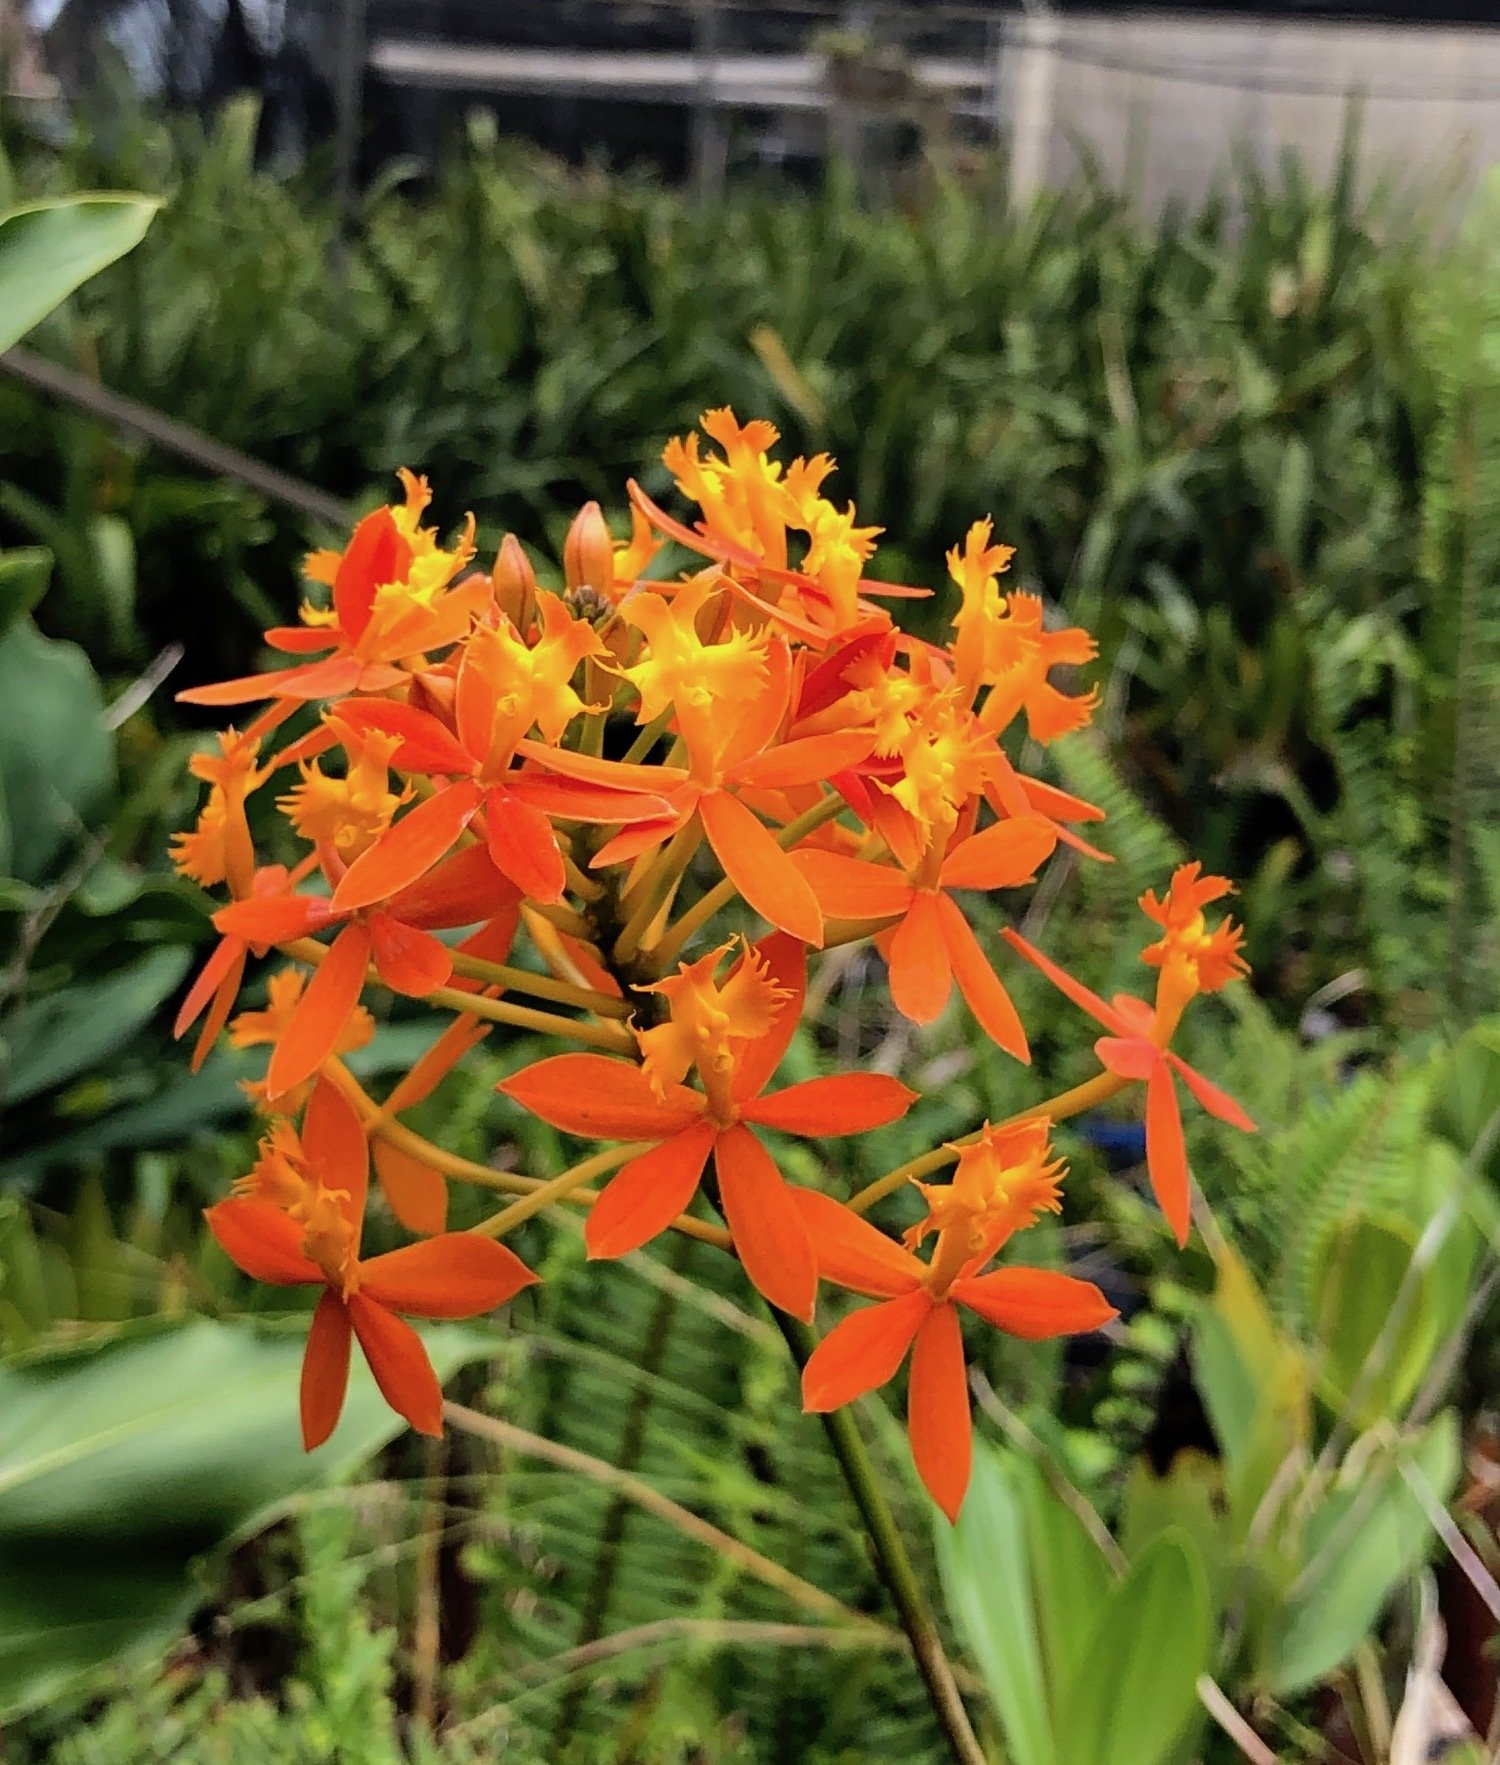 Epidendrums - Crucifix Orchids